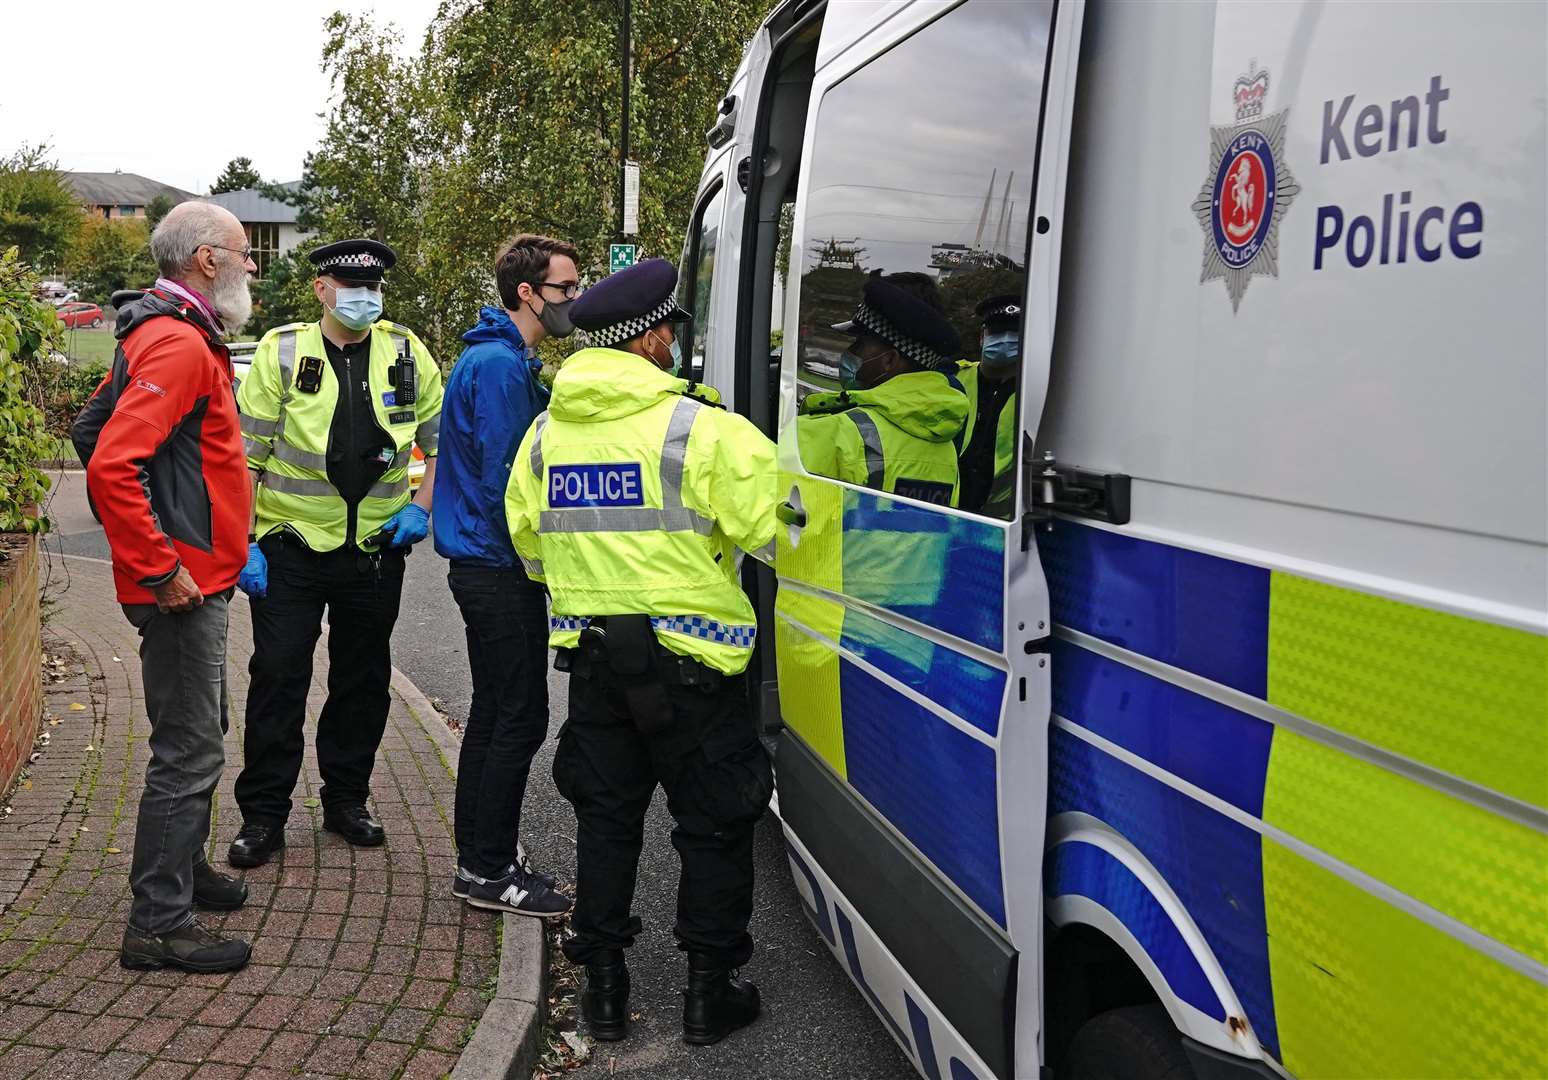 Protesters from Insulate Britain are arrested by police in the car park of a hotel near the Dartford Crossing (Jonathan Brady/PA)